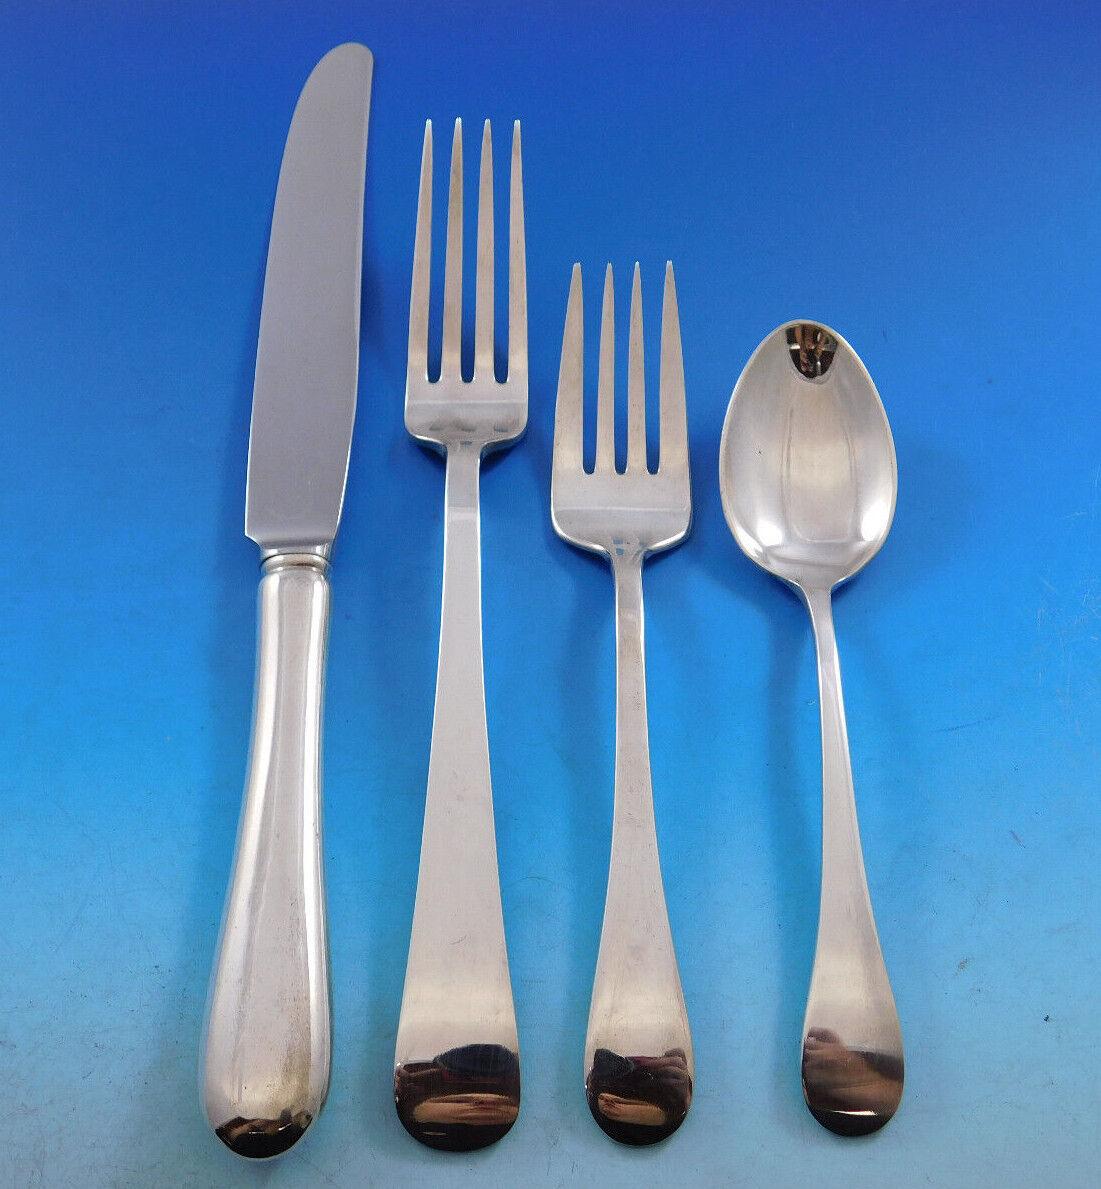 The unadorned Hannah Hull pattern, known for its simple, clean lines, was inspired by old colonial design and was first introduced by Tuttle in 1927.
Monumental Dinner and Luncheon size Hannah Hull by Tuttle sterling silver Flatware set, 115 pieces.